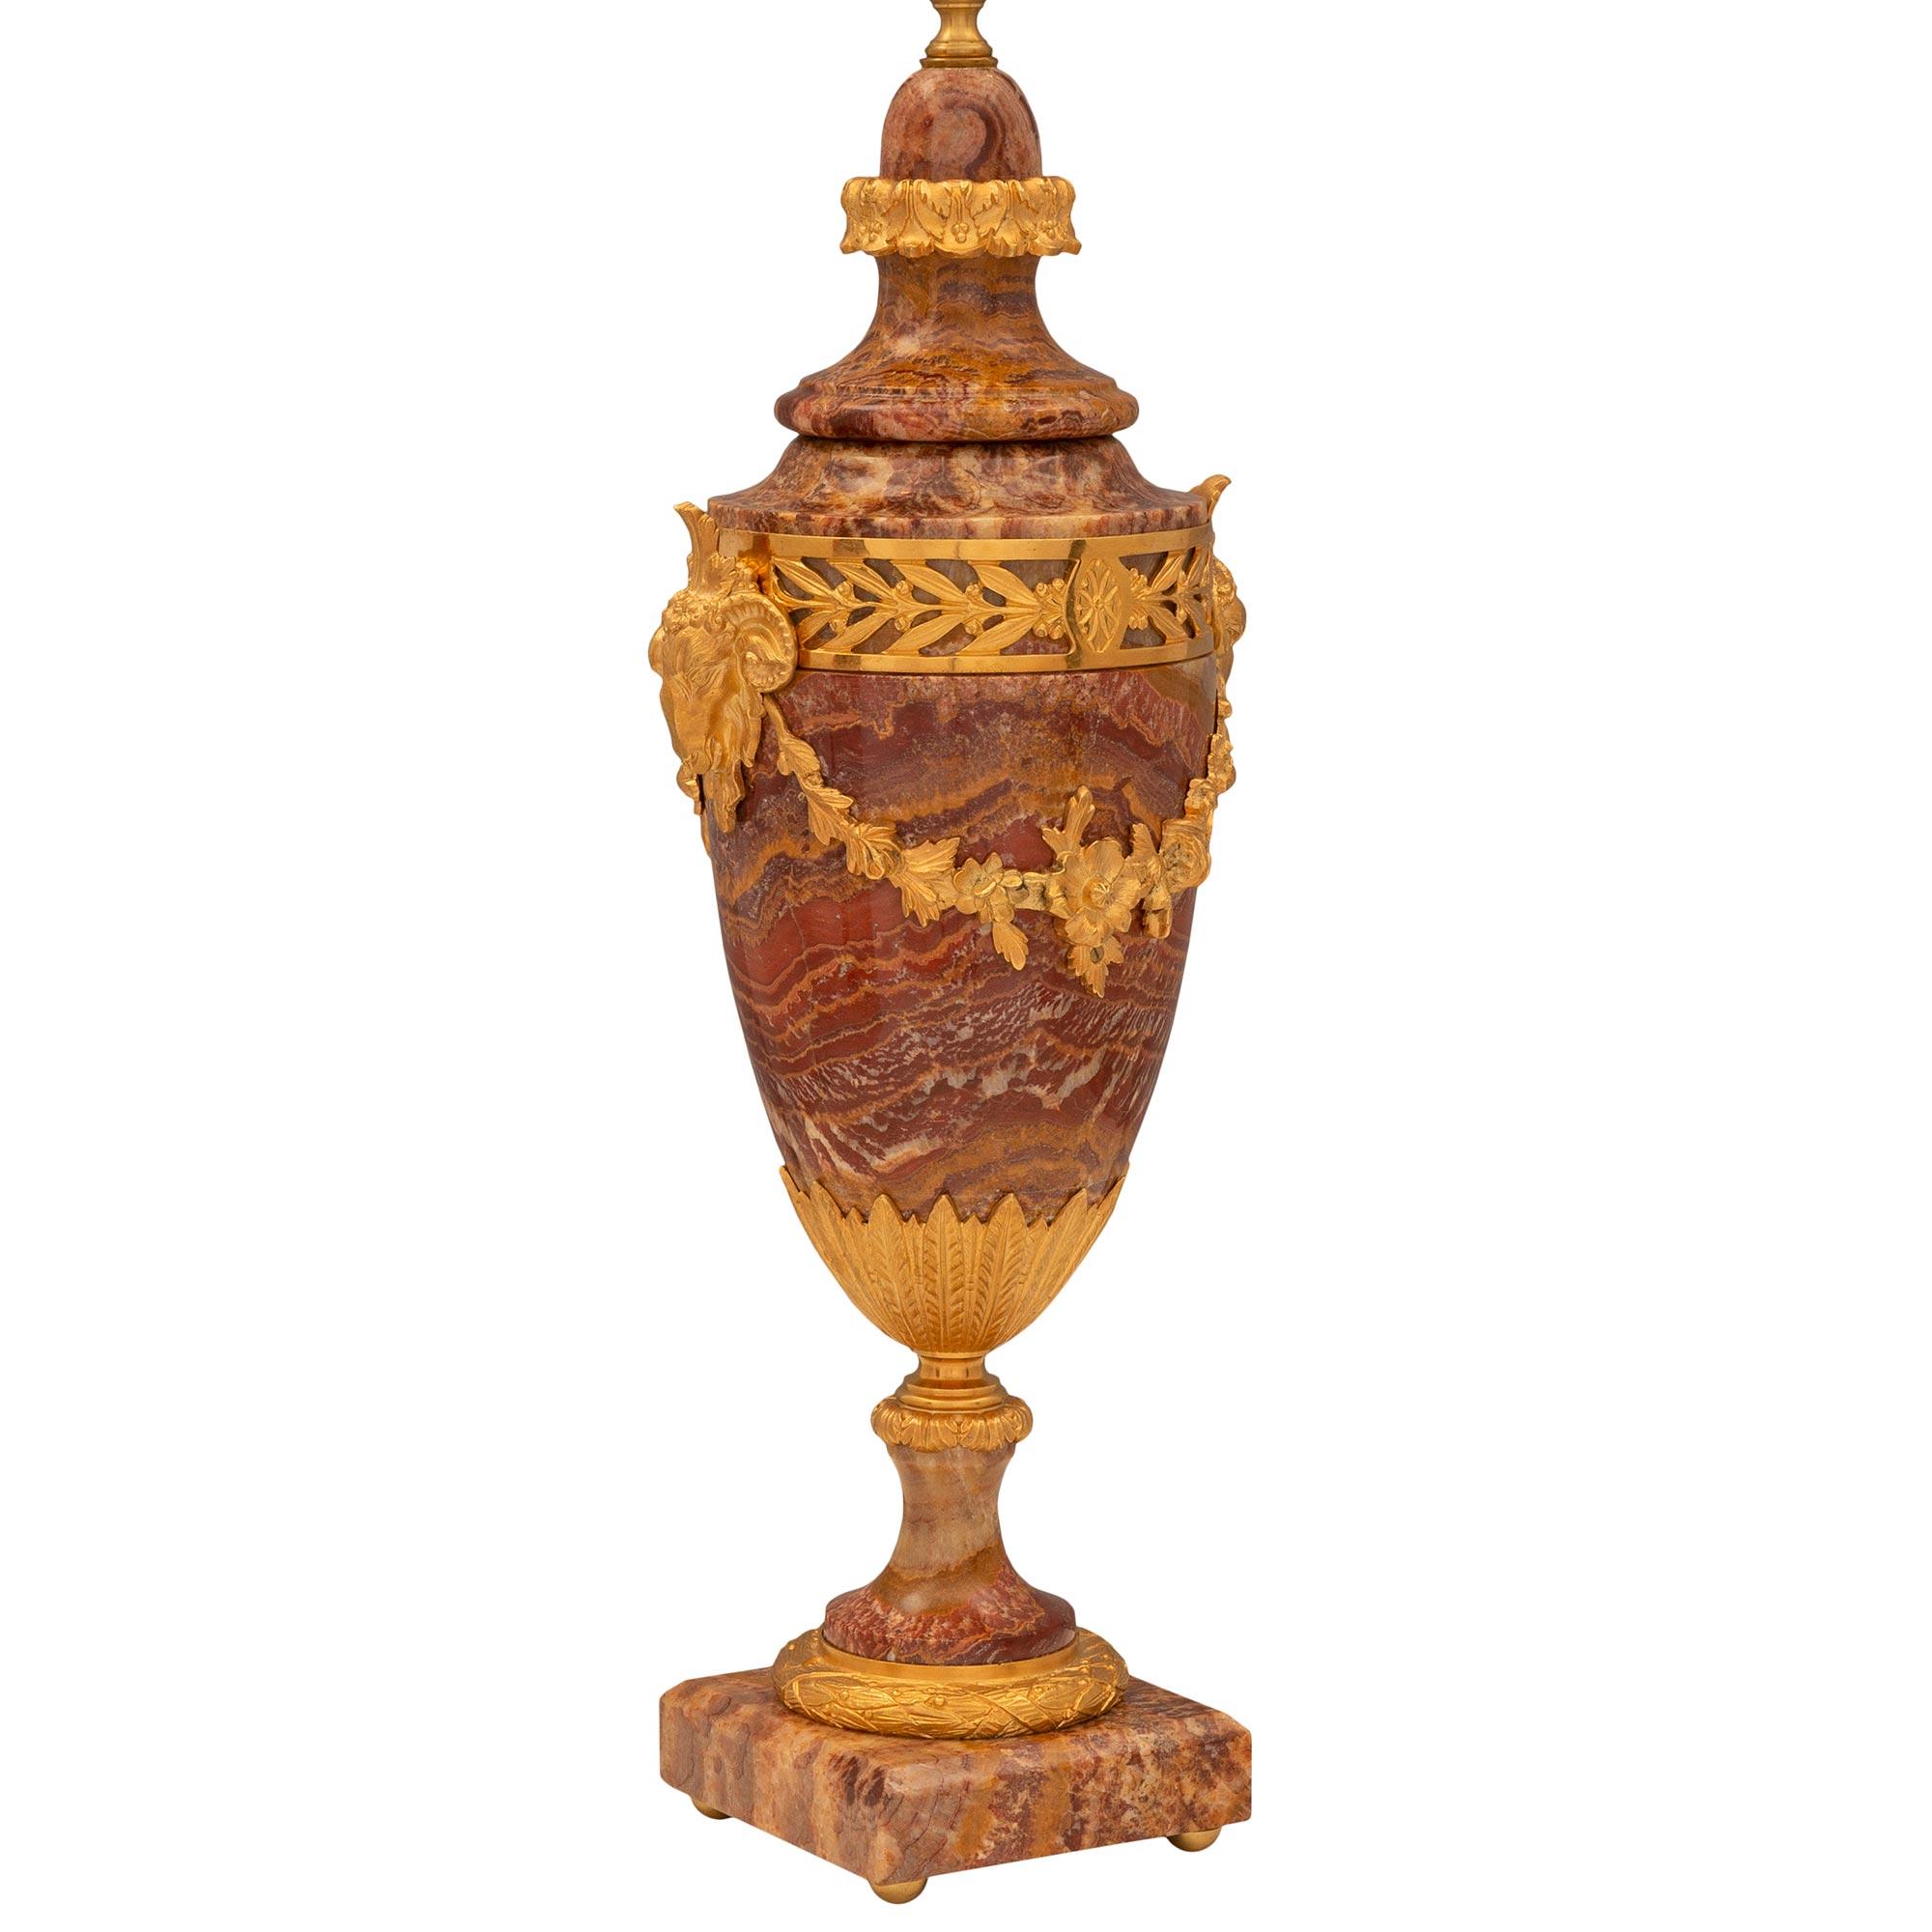 An exceptional and most decorative pair of French 19th century Louis XVI st. red Vulcano onyx and ormolu lamps. Each lamp is raised by a square base with fine ormolu ball feet and a beautiful wrap around tied berried laurel ormolu band at the